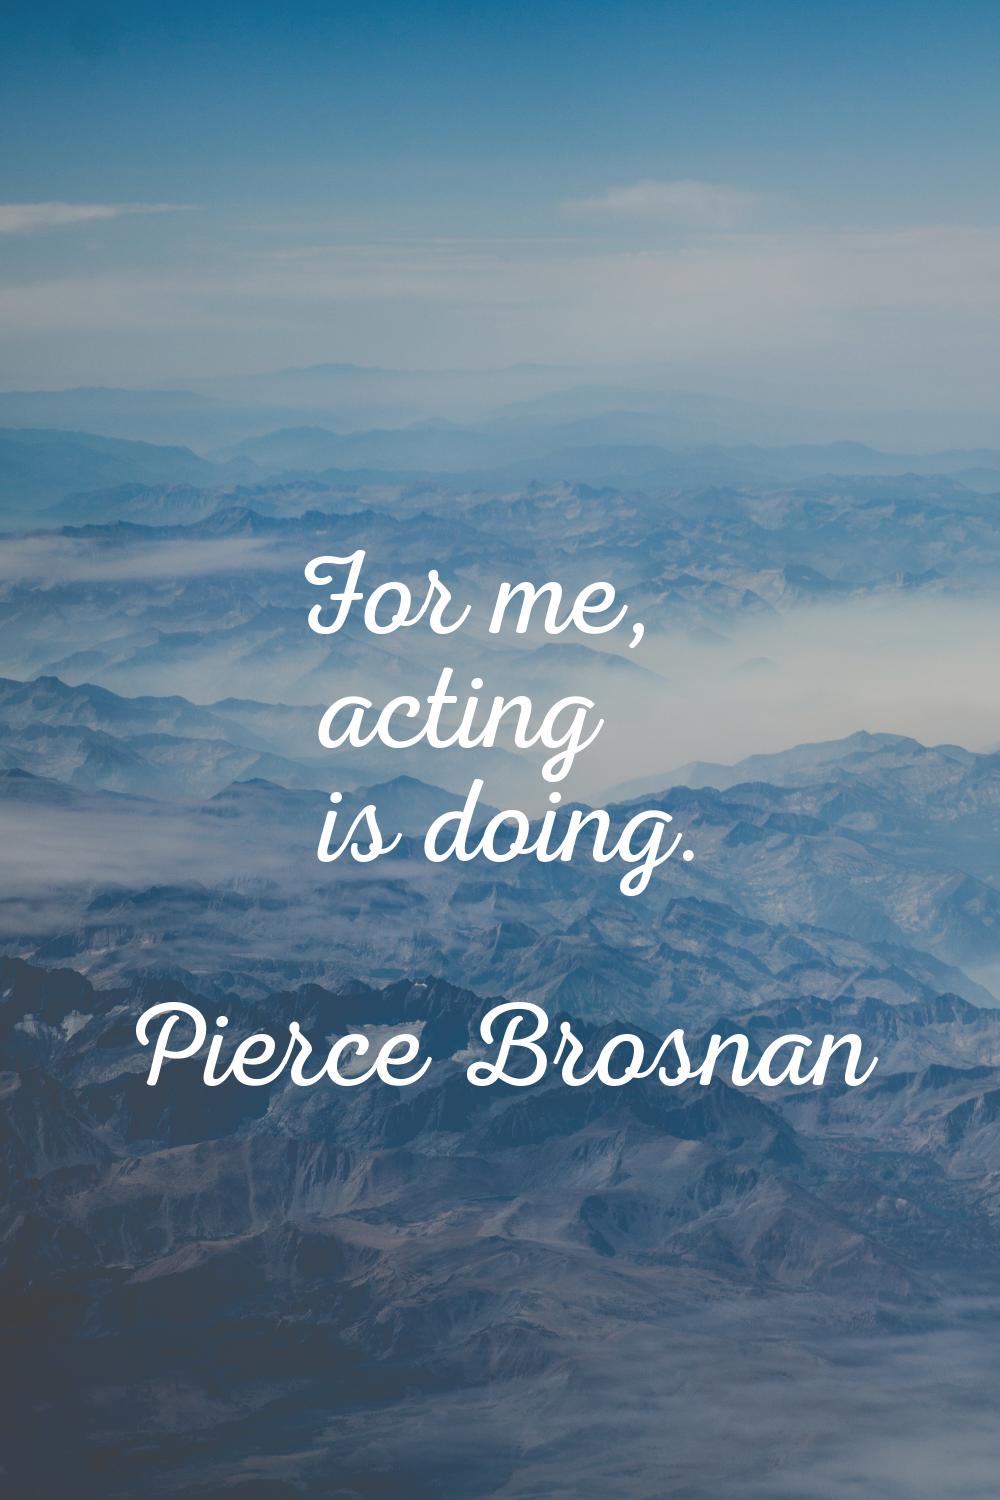 For me, acting is doing.